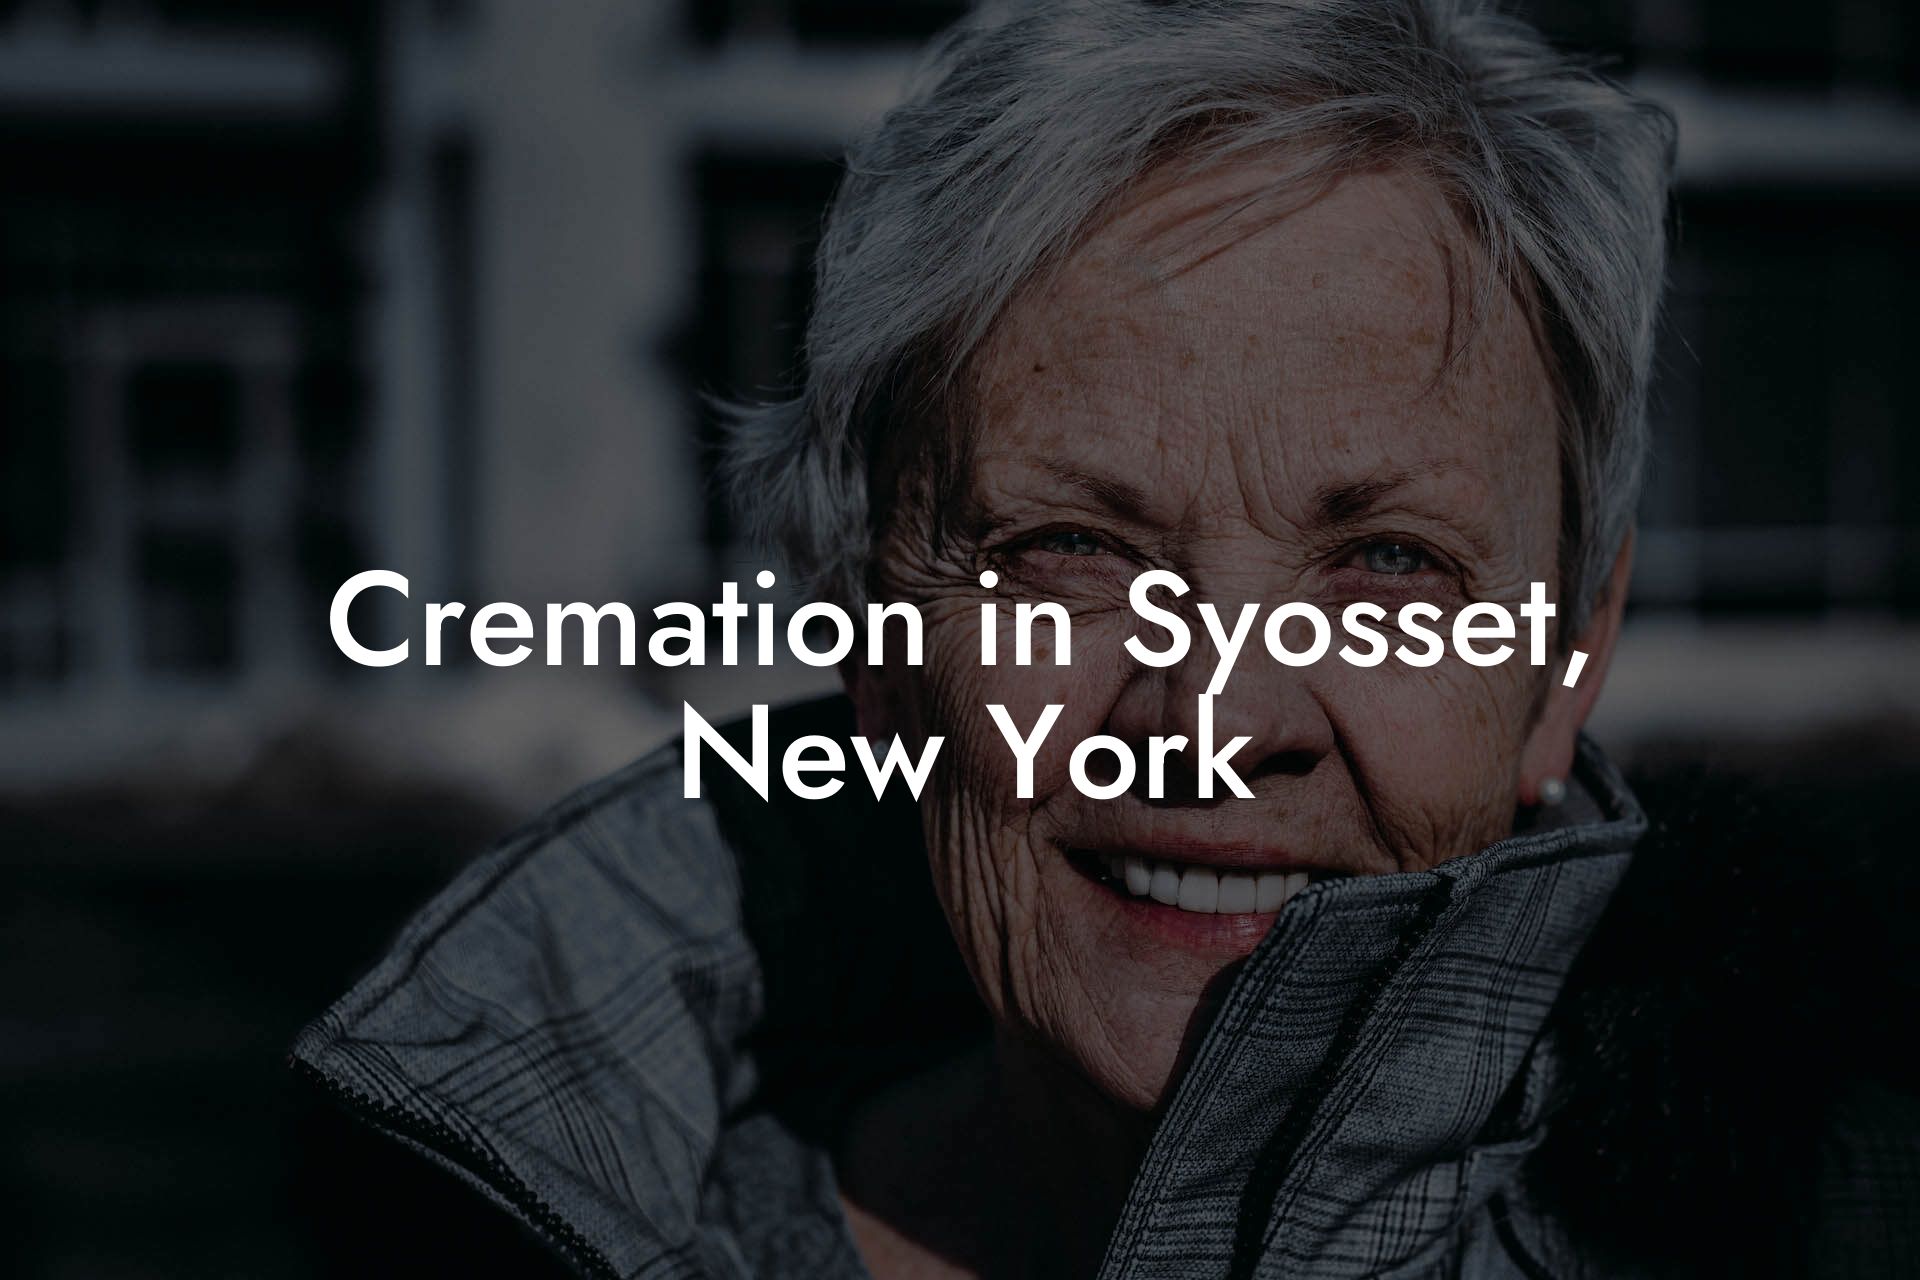 Cremation in Syosset, New York